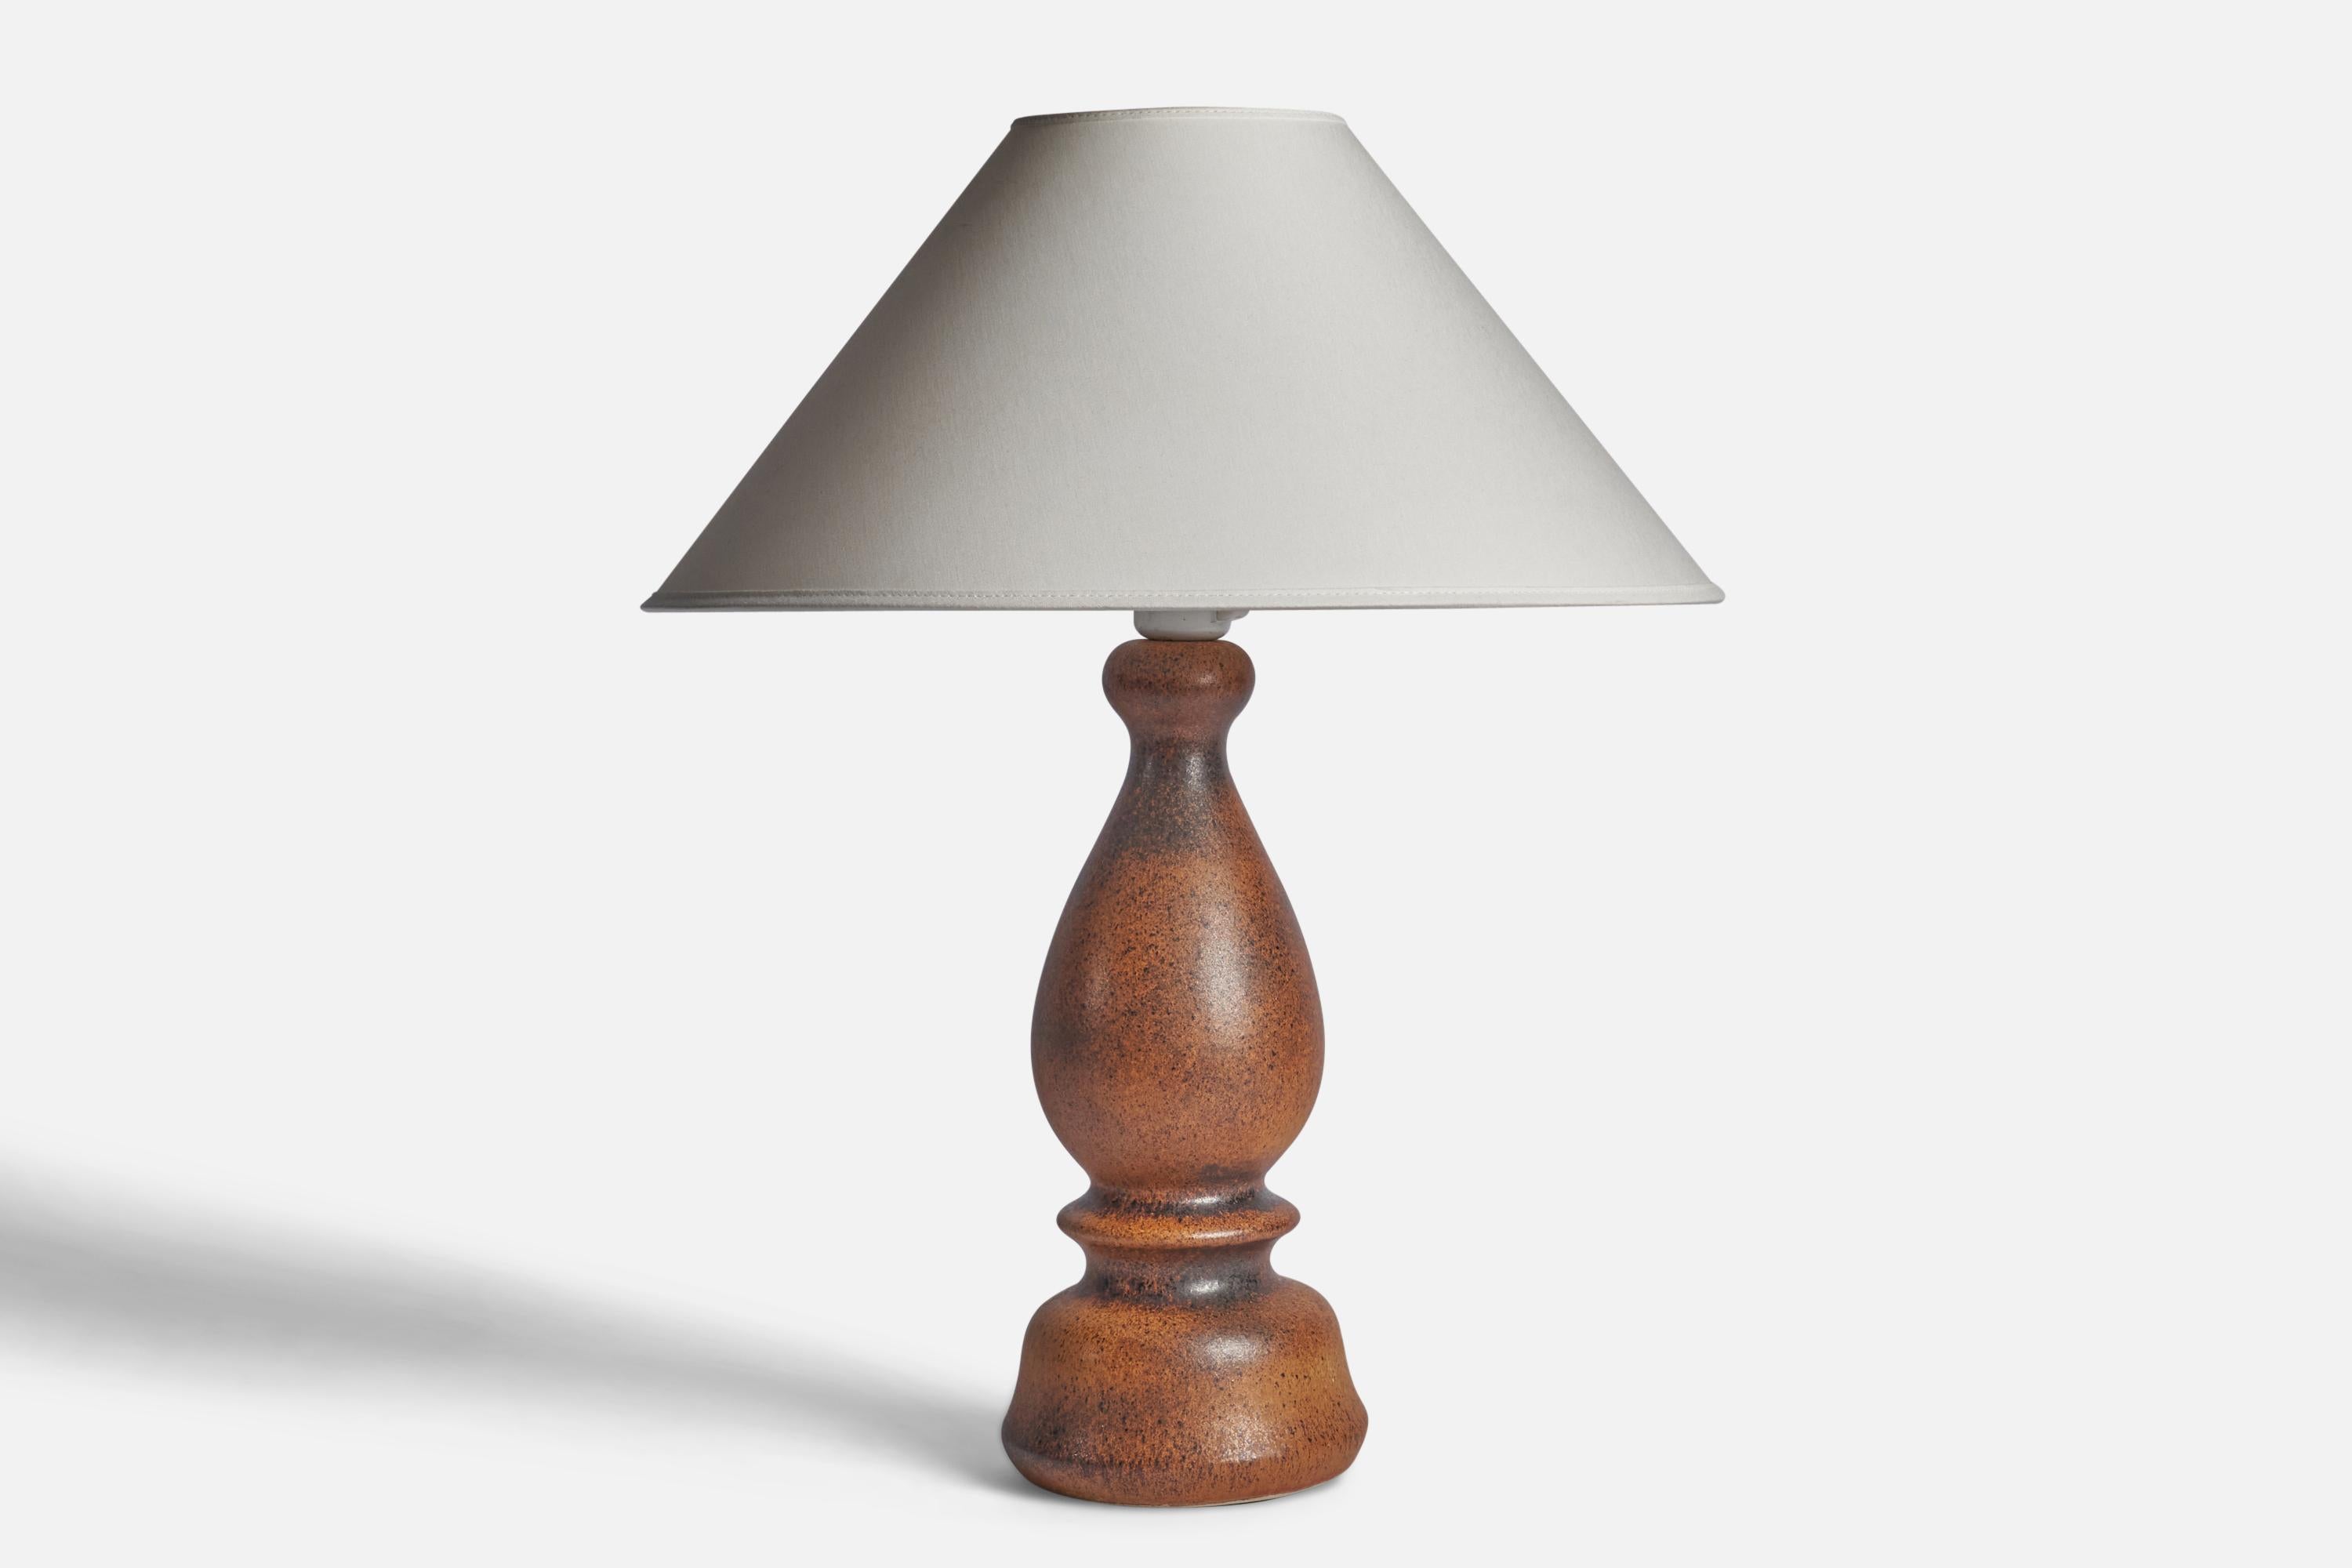 A brown-glazed stoneware table lamp designed by Bruno Karlsson and produced by Ego Stengods, Sweden, 1960s.

Dimensions of Lamp (inches): 15.5” H x 5.5” Diameter
Dimensions of Shade (inches): 4.5” Top Diameter x 16” Bottom Diameter x 7.25”